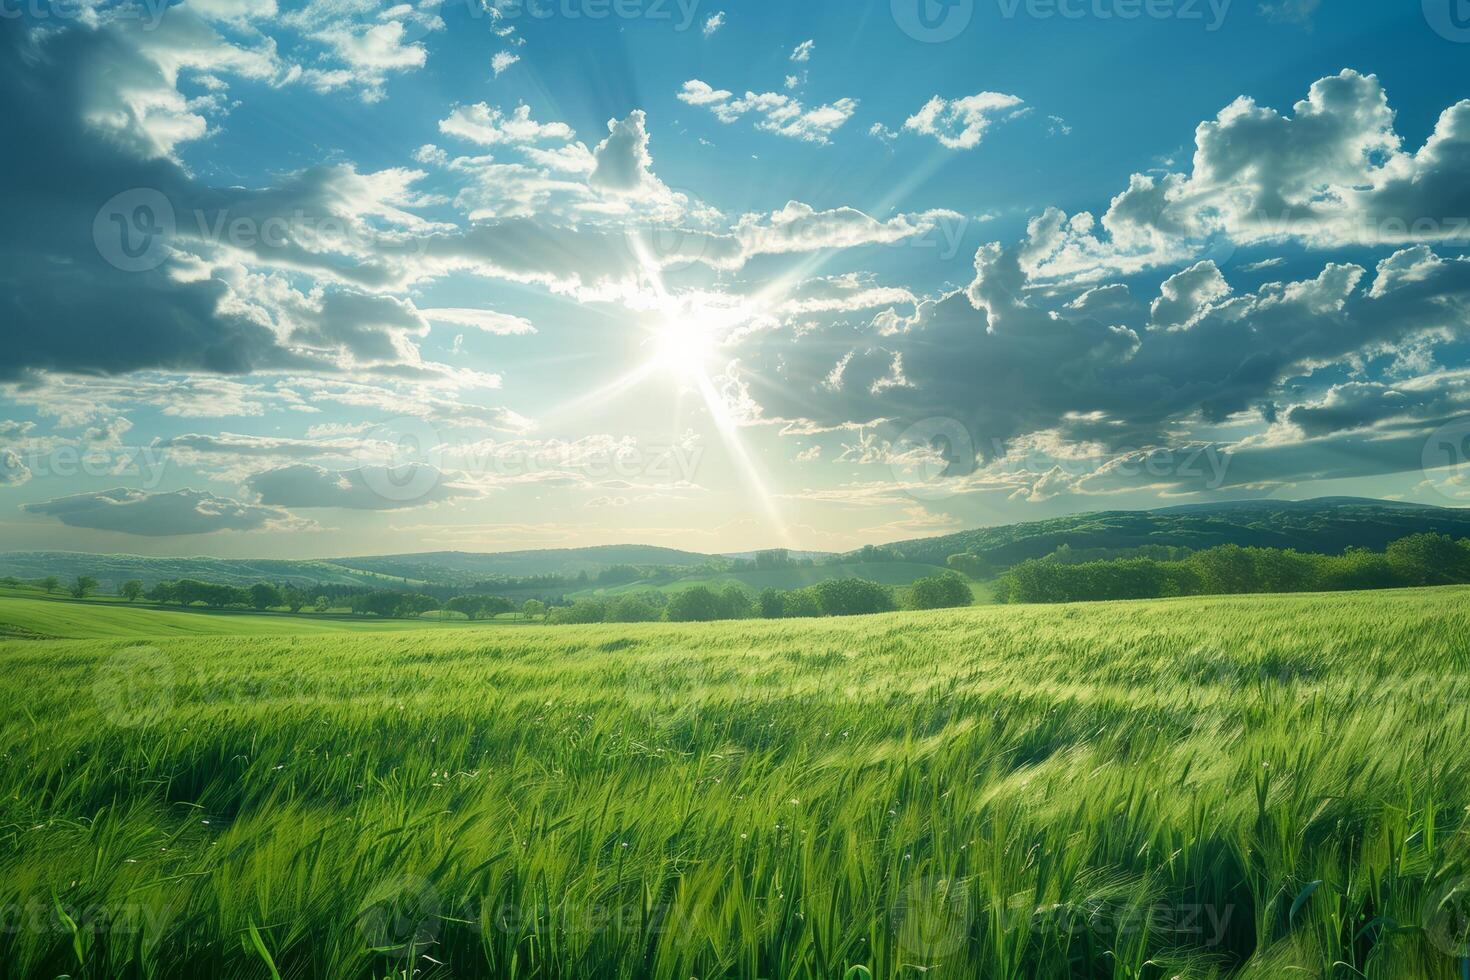 Clear sky, sunny weather, green grass, beautiful landscape photo